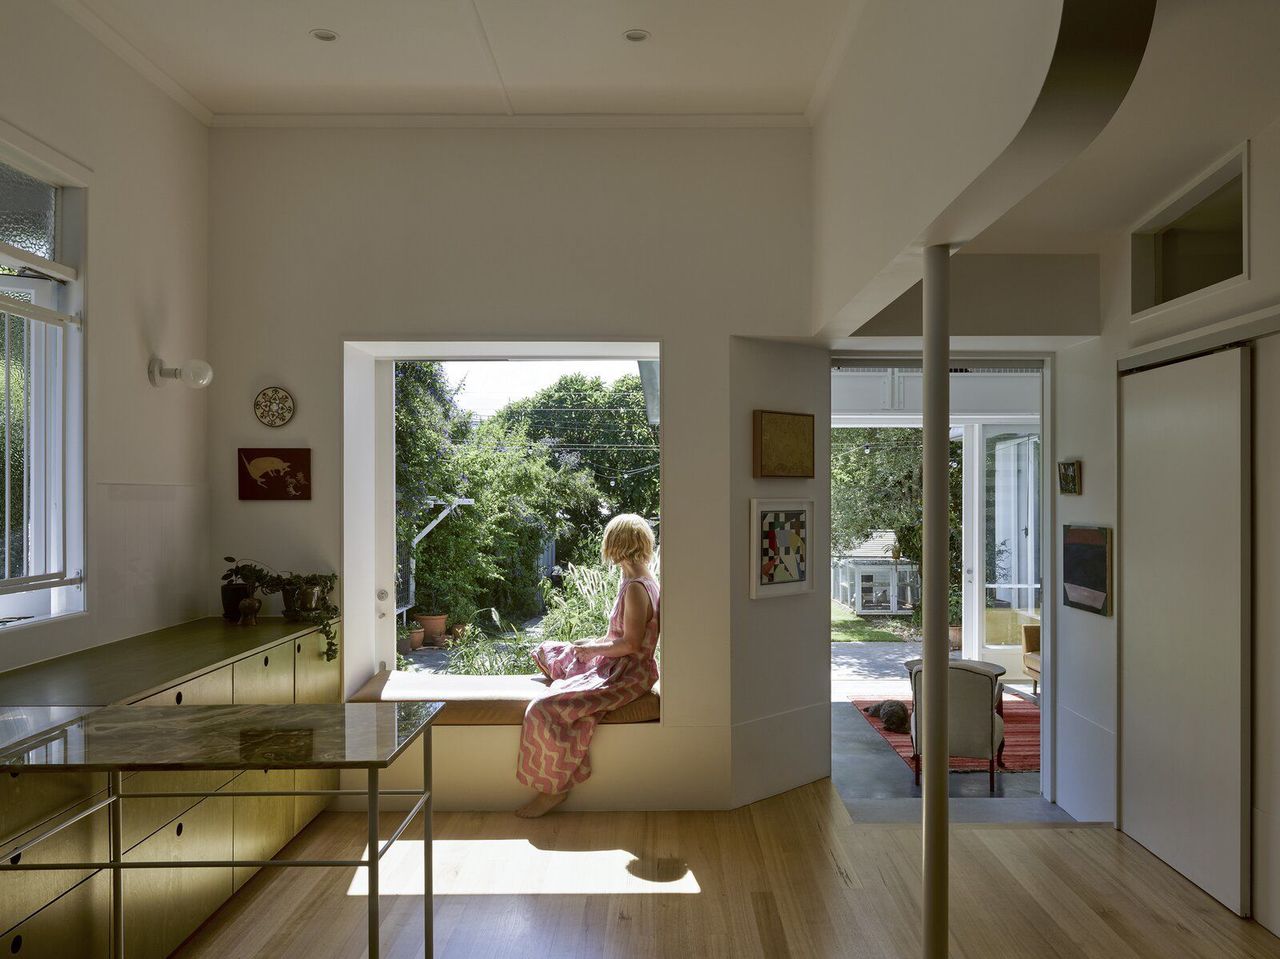 A Family’s Queenslander Cottage Is Cracked Open With an Airy, Shed-Like ...